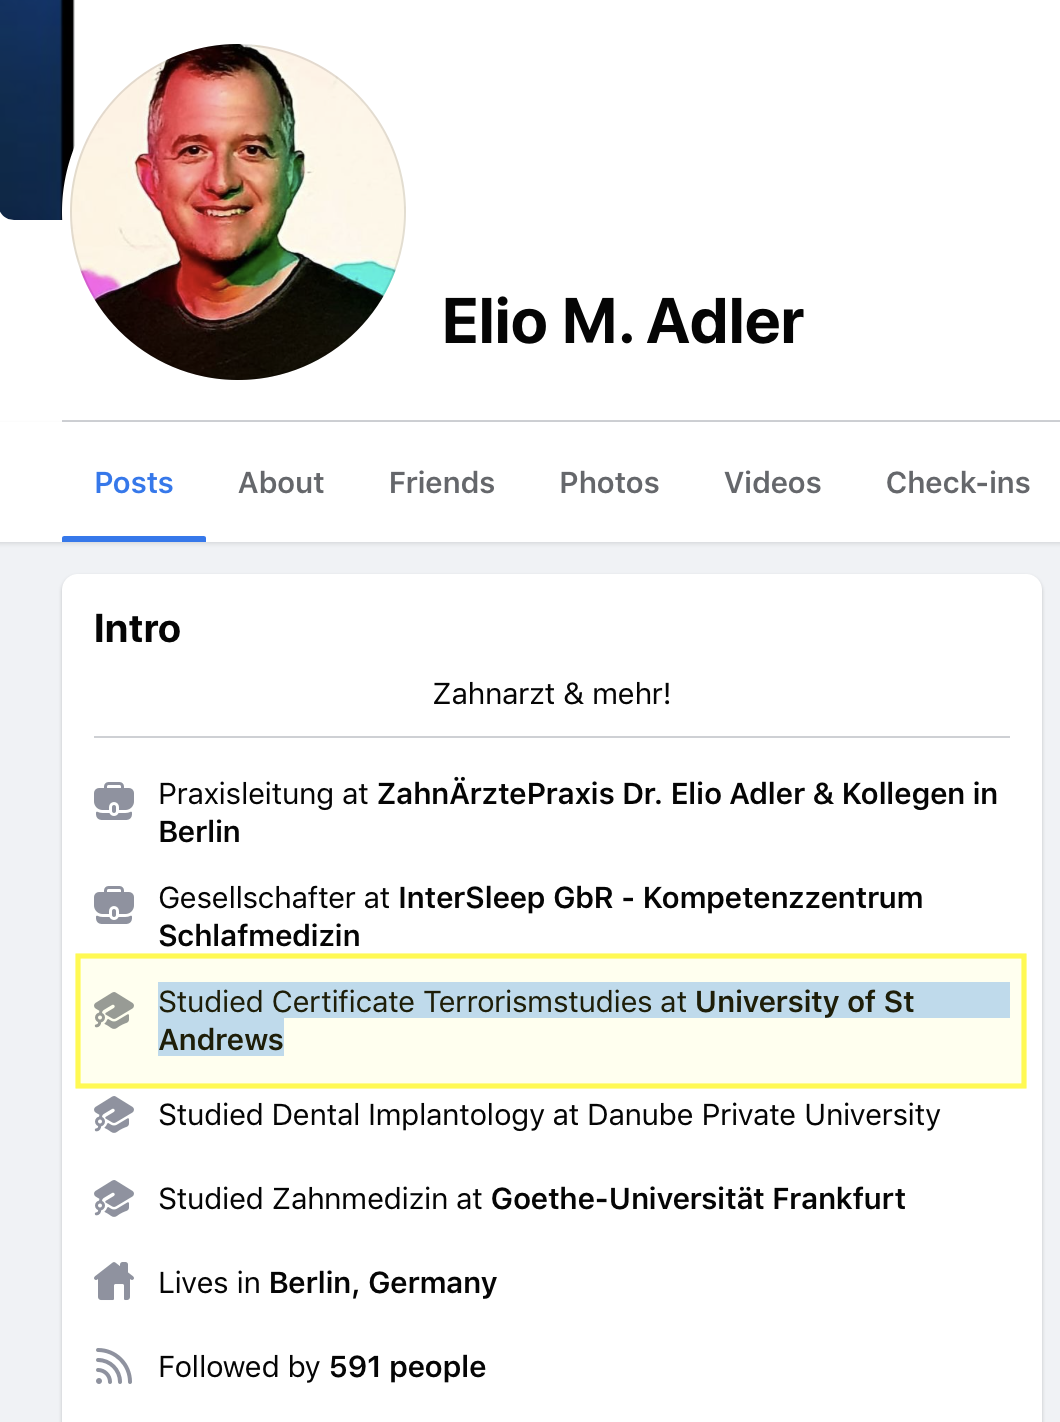 Dr. Elio Adler's Facebook page about section